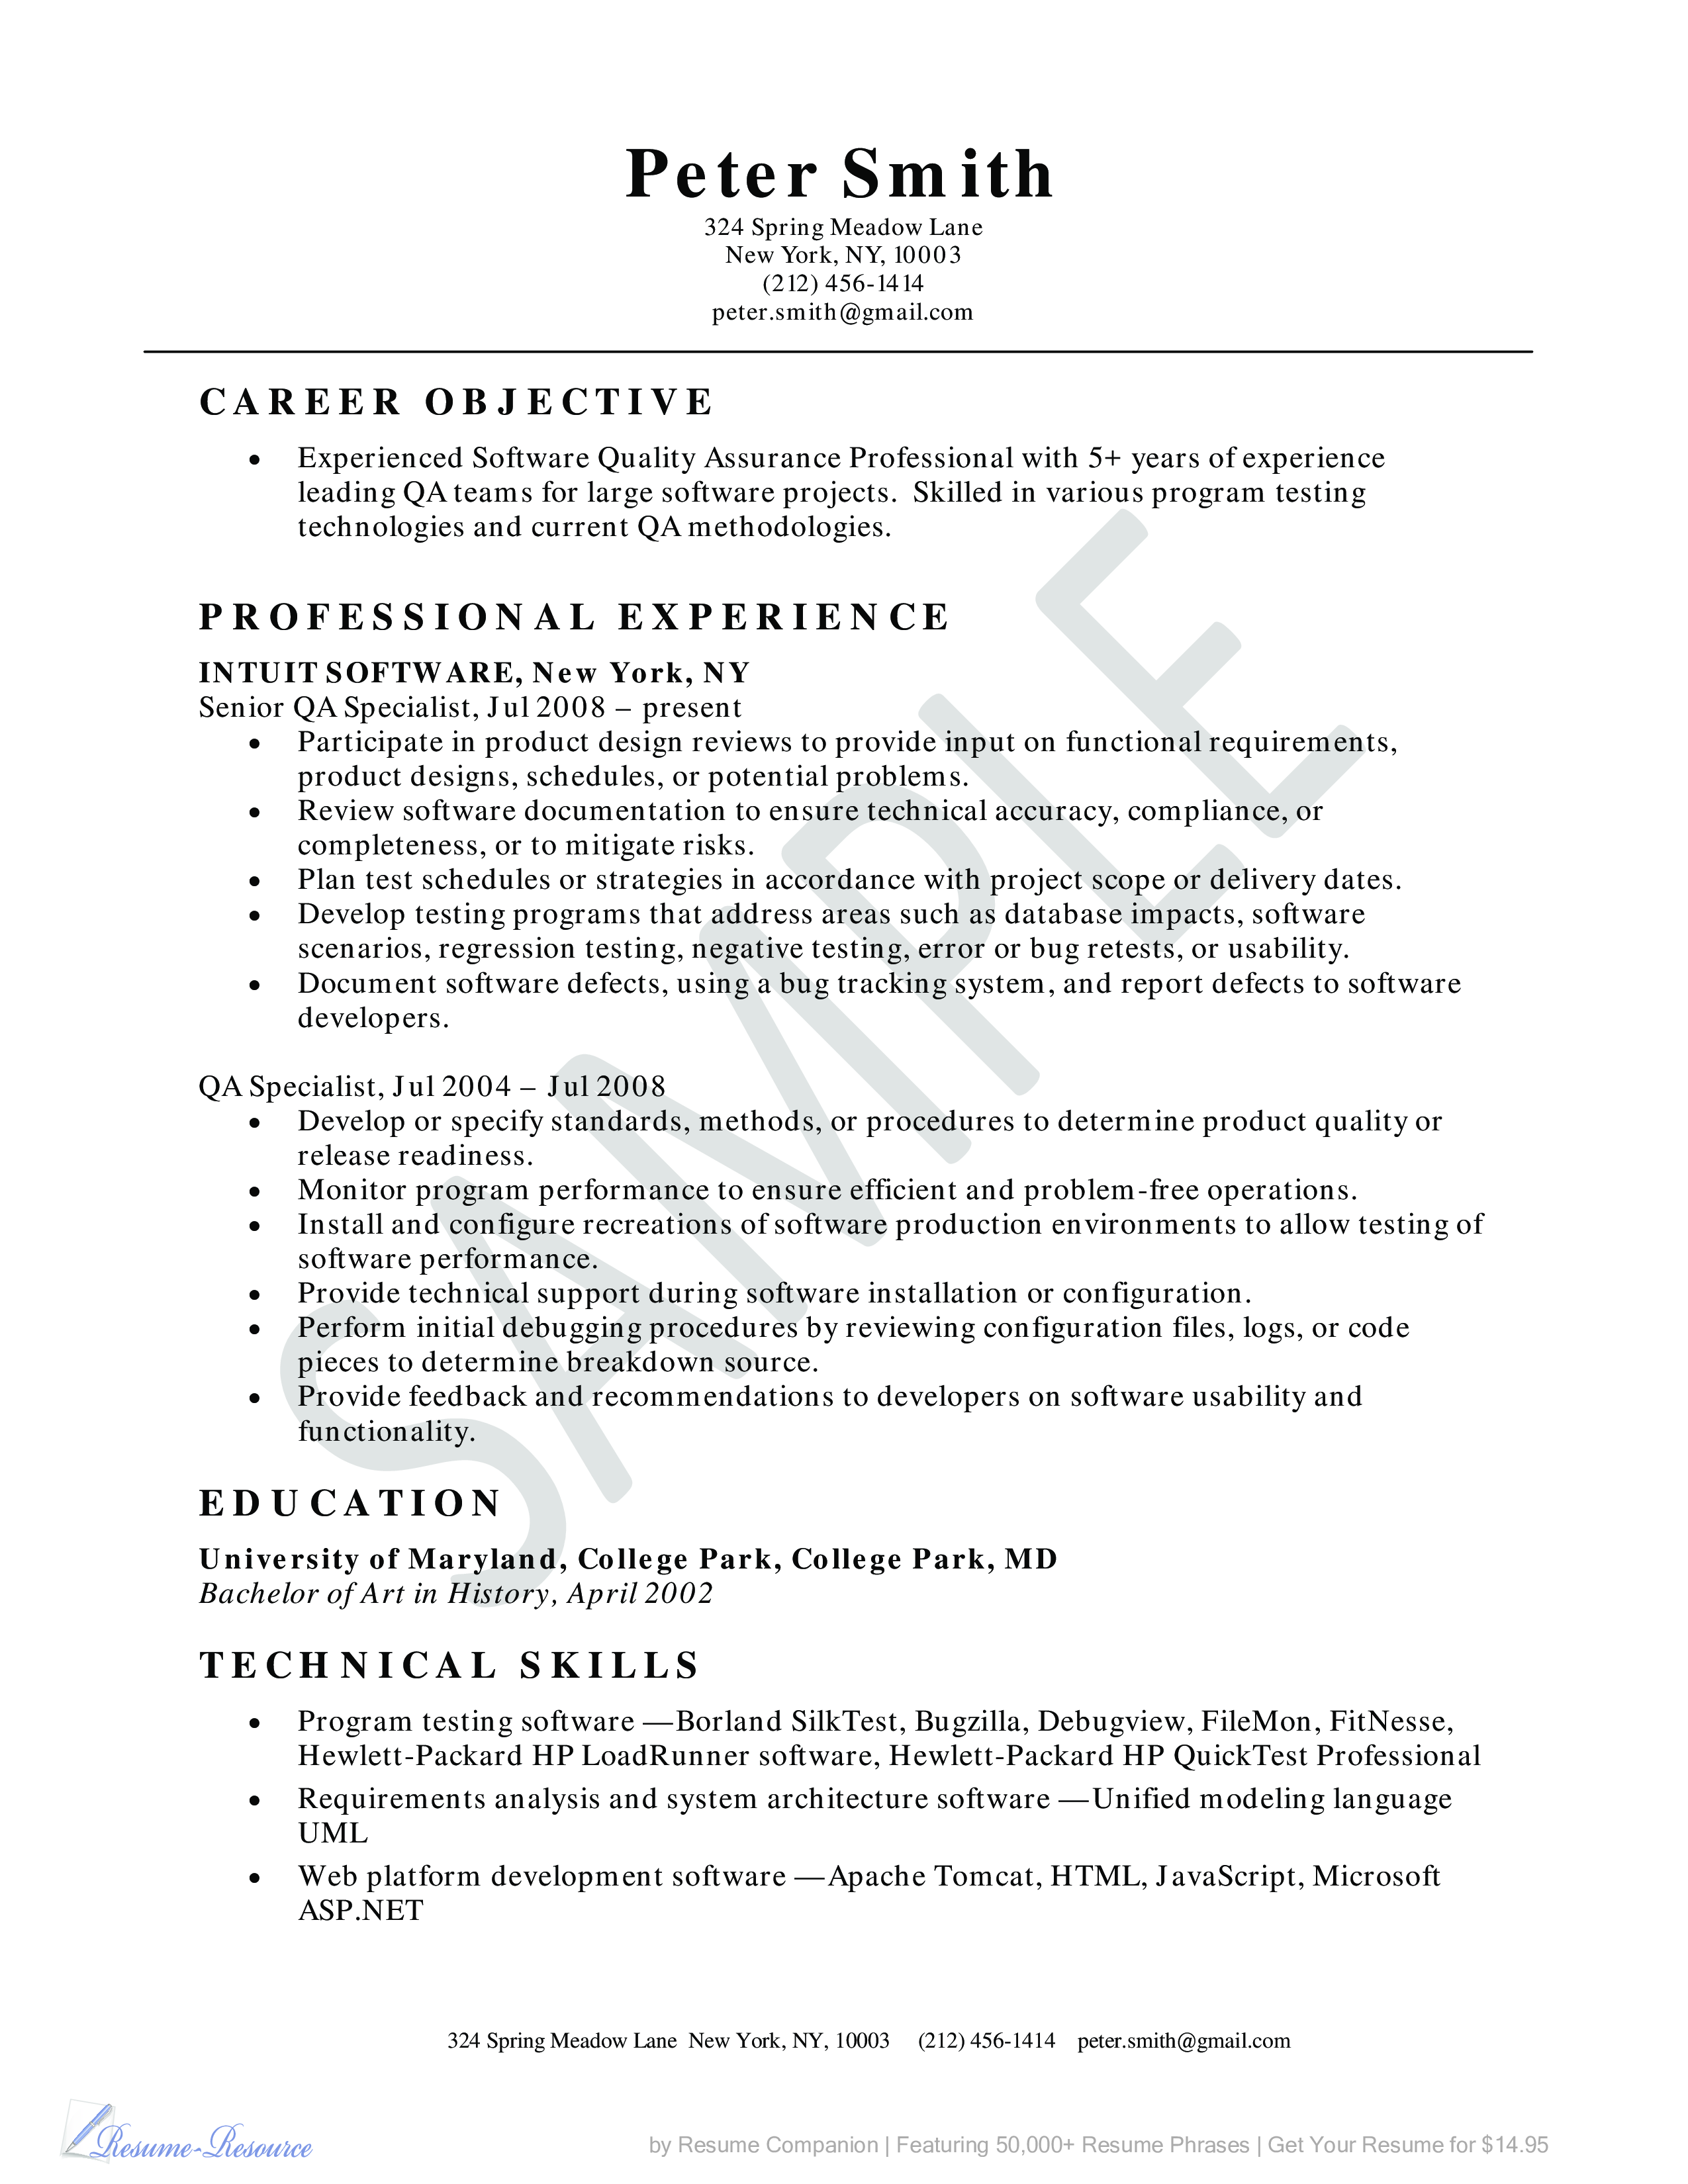 resume format for quality assurance